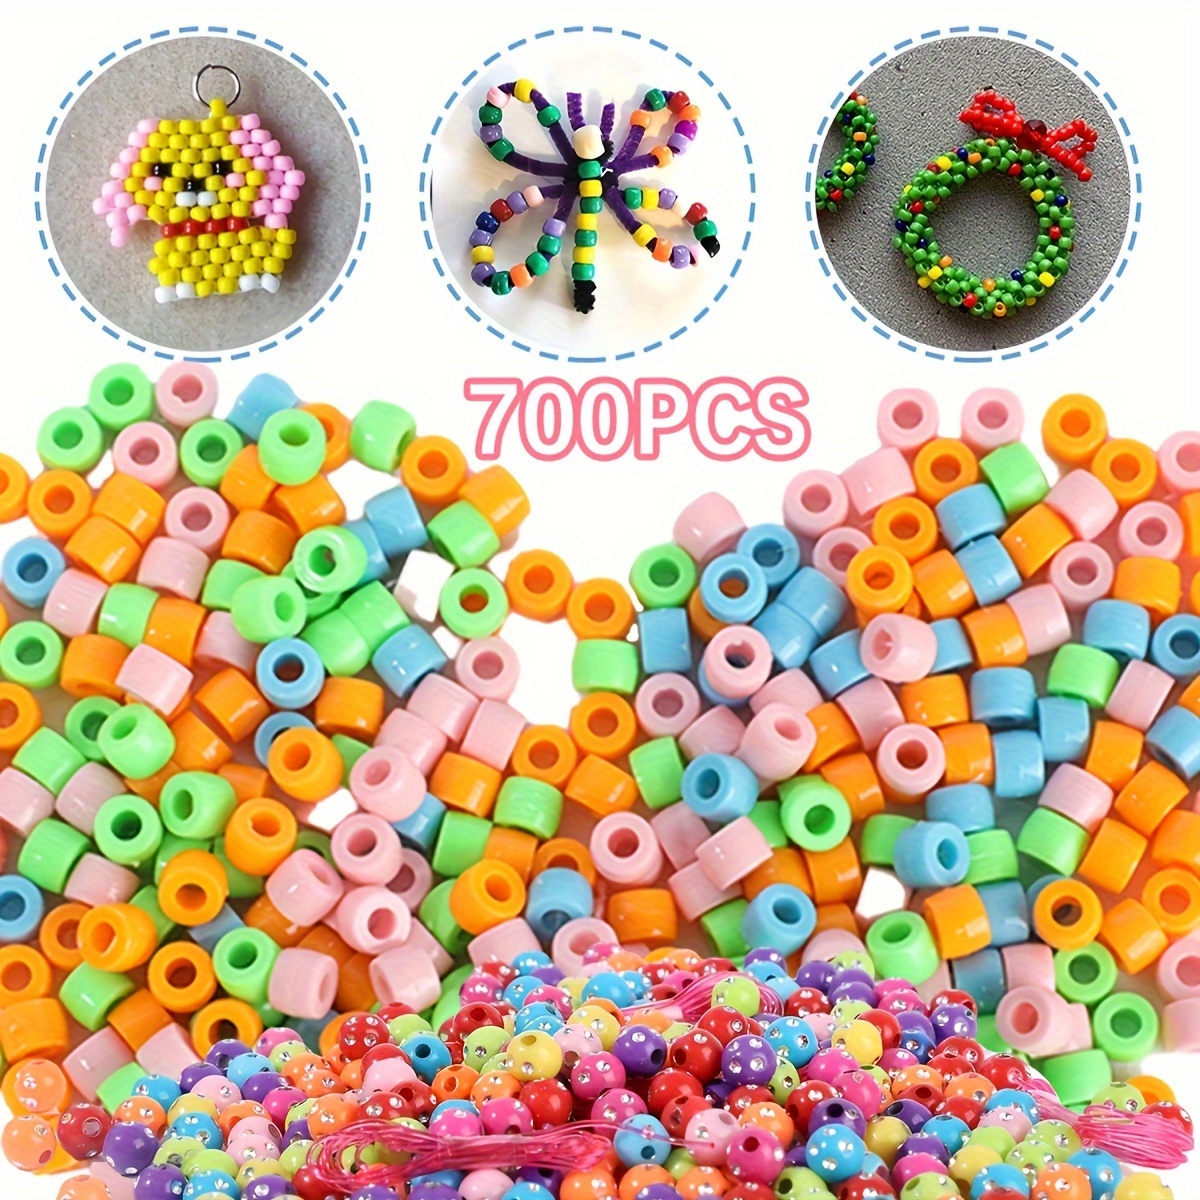 2062pcs New Jewelry Making Supplies Kit DIY Jewelry Accessories Letter Beading  Set Material For DIY Jewelry Making Beads Set Toy Perfect Gift Box For DIY  Lovers Adults Teens Girls